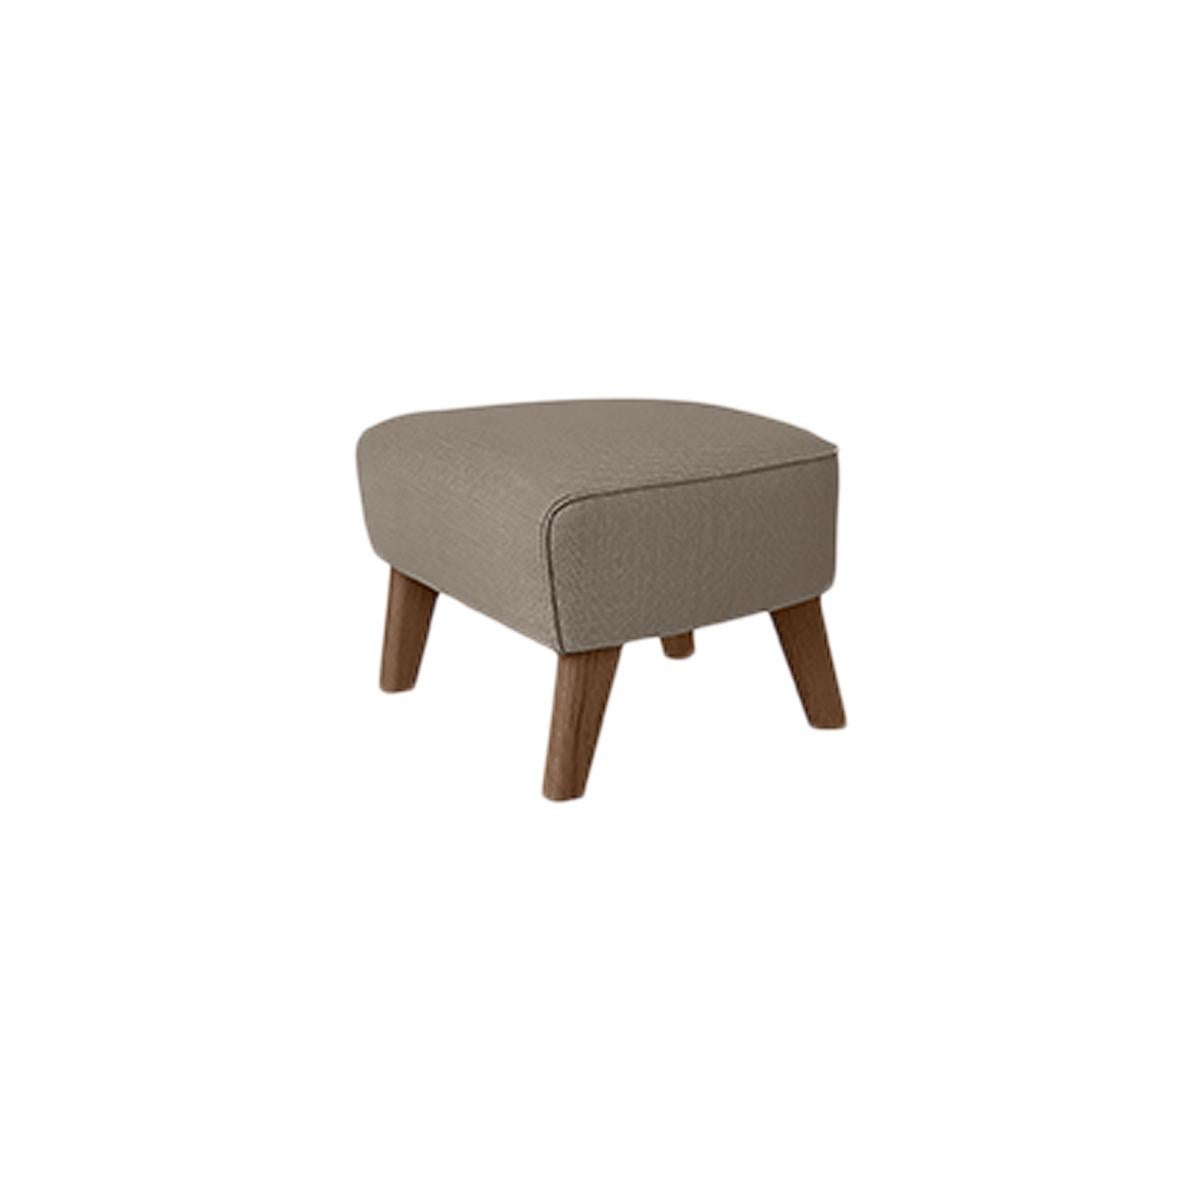 Dark beige and smoked Oak Raf Simons Vidar 3 my own chair footstool by Lassen
Dimensions: W 56 x D 58 x H 40 cm 
Materials: Textile
Also Available: Other colors available.

The my own chair footstool has been designed in the same spirit as